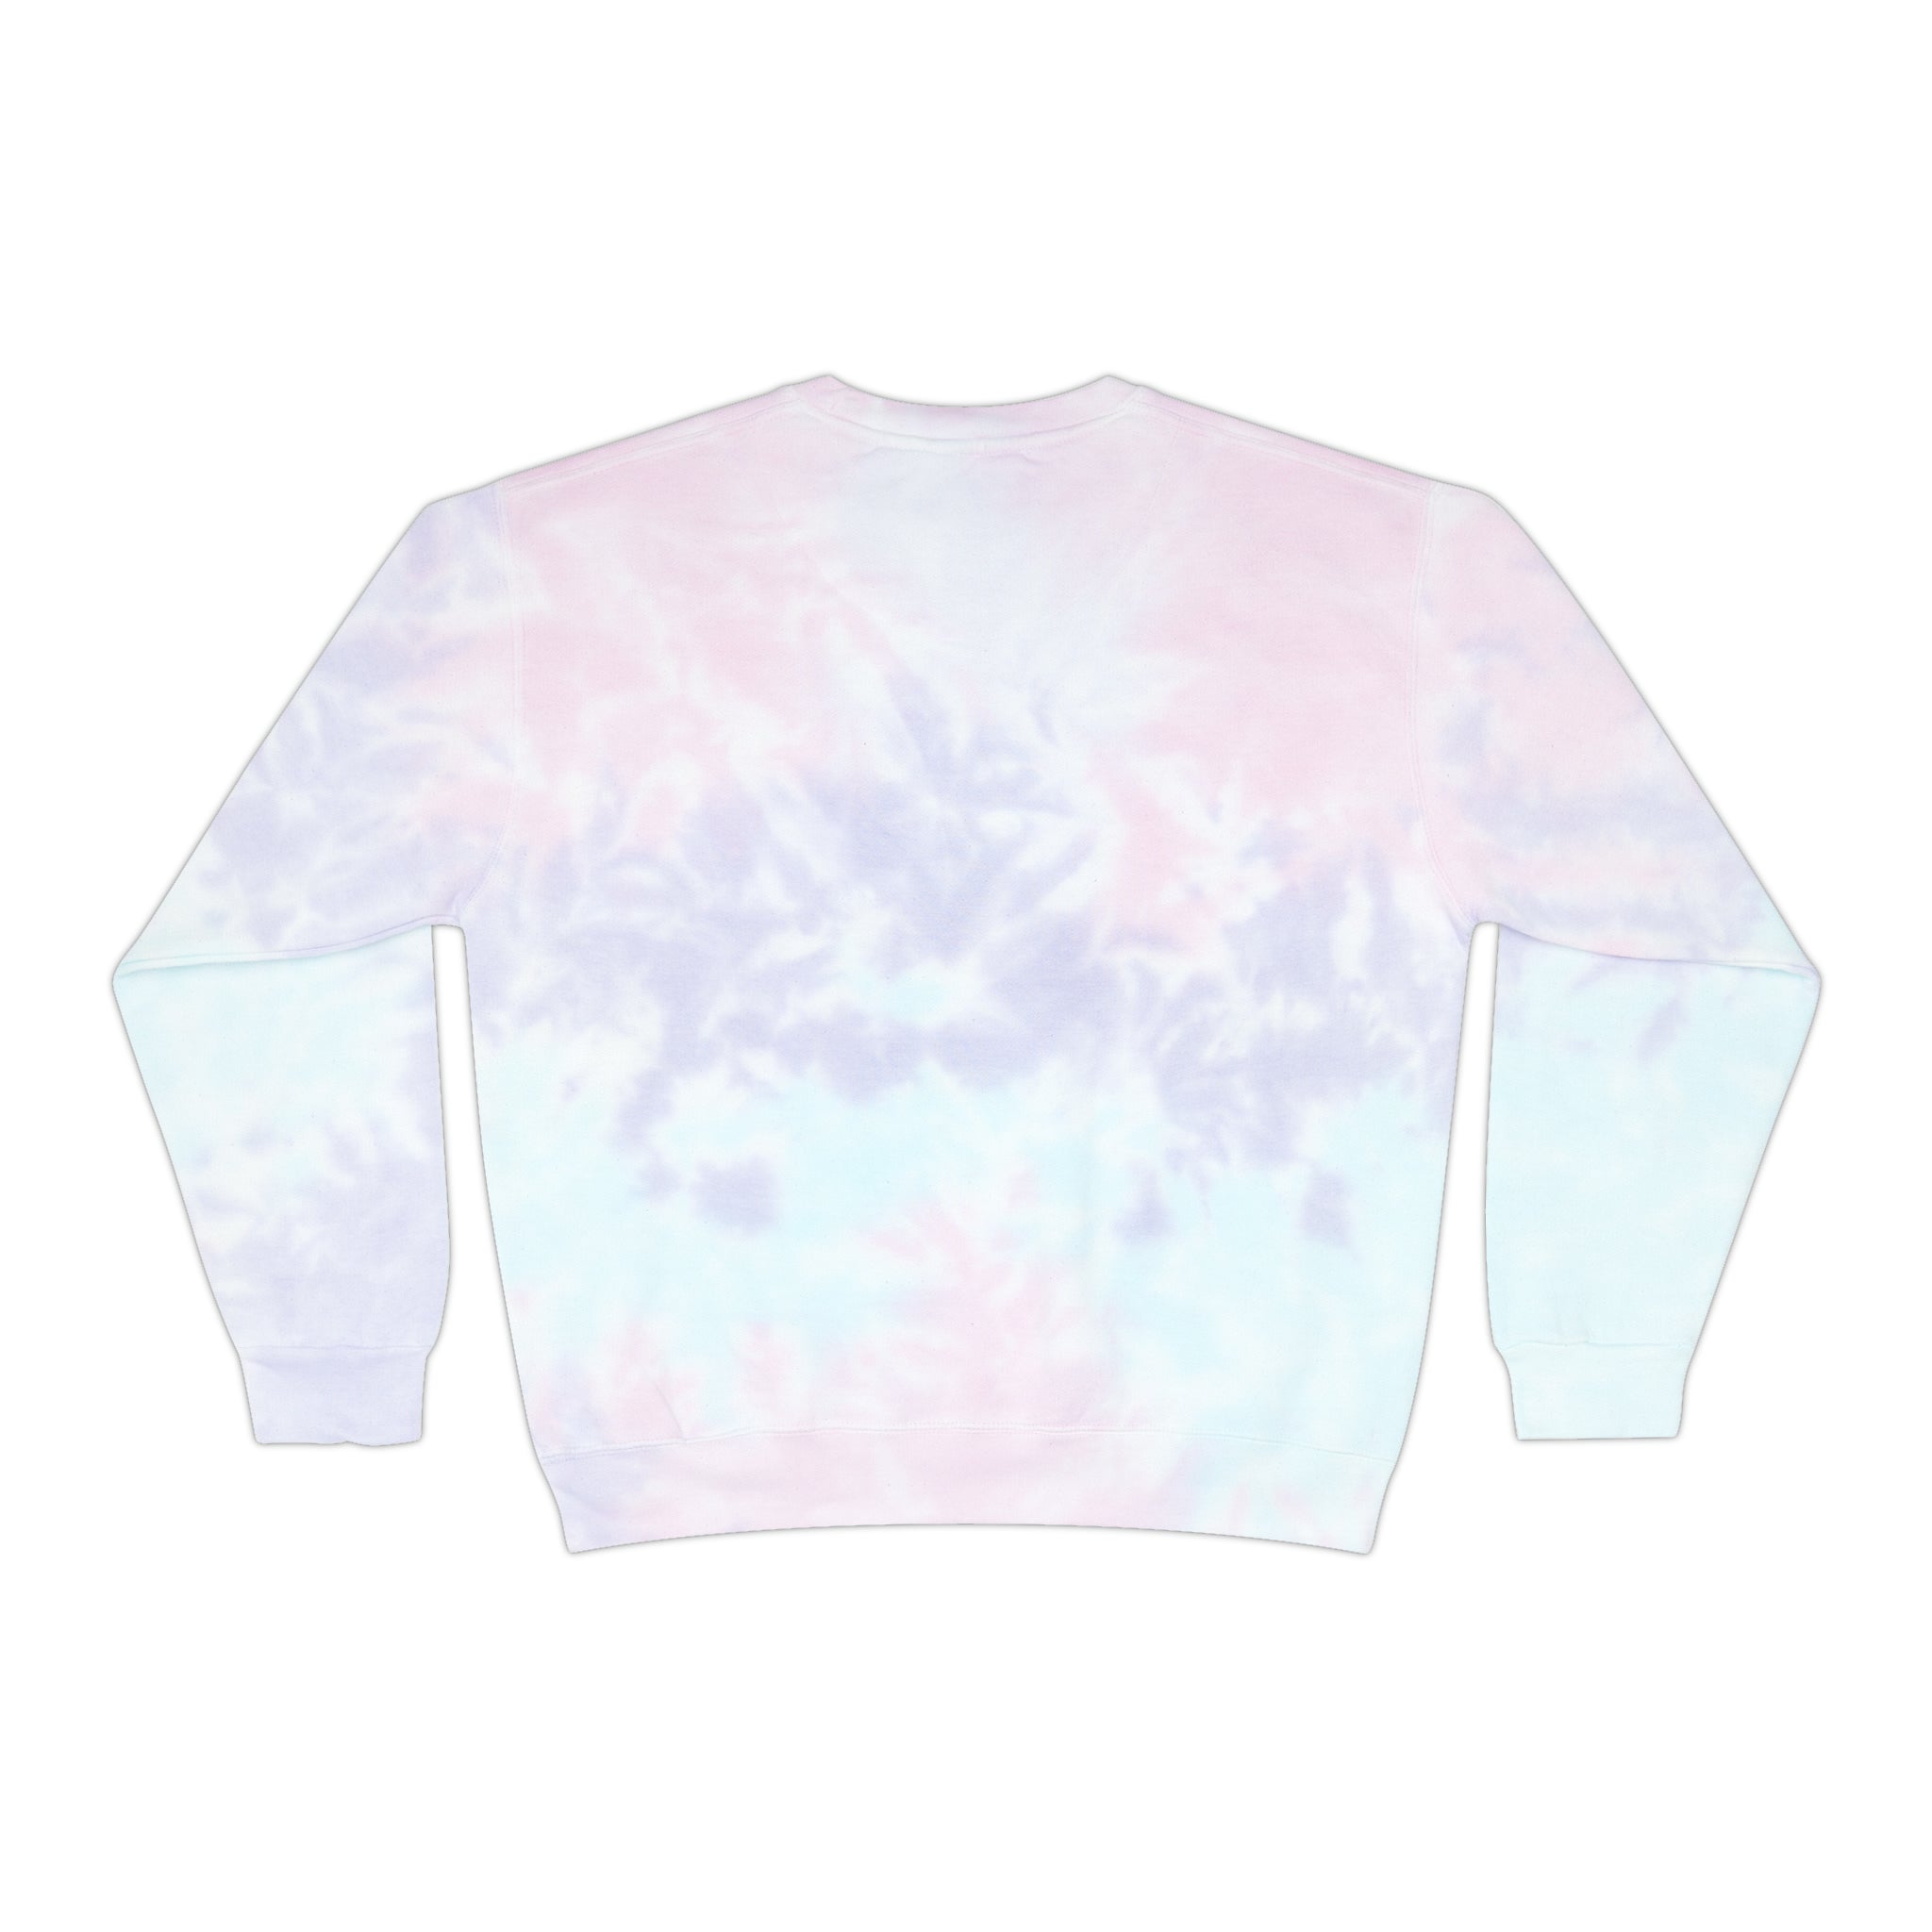 "The World Needs You In It, You Matter" Suicide Prevention Awareness Unisex Tie-Dye Sweatshirt - Empowerment & Mental Health Support Fashion Statement